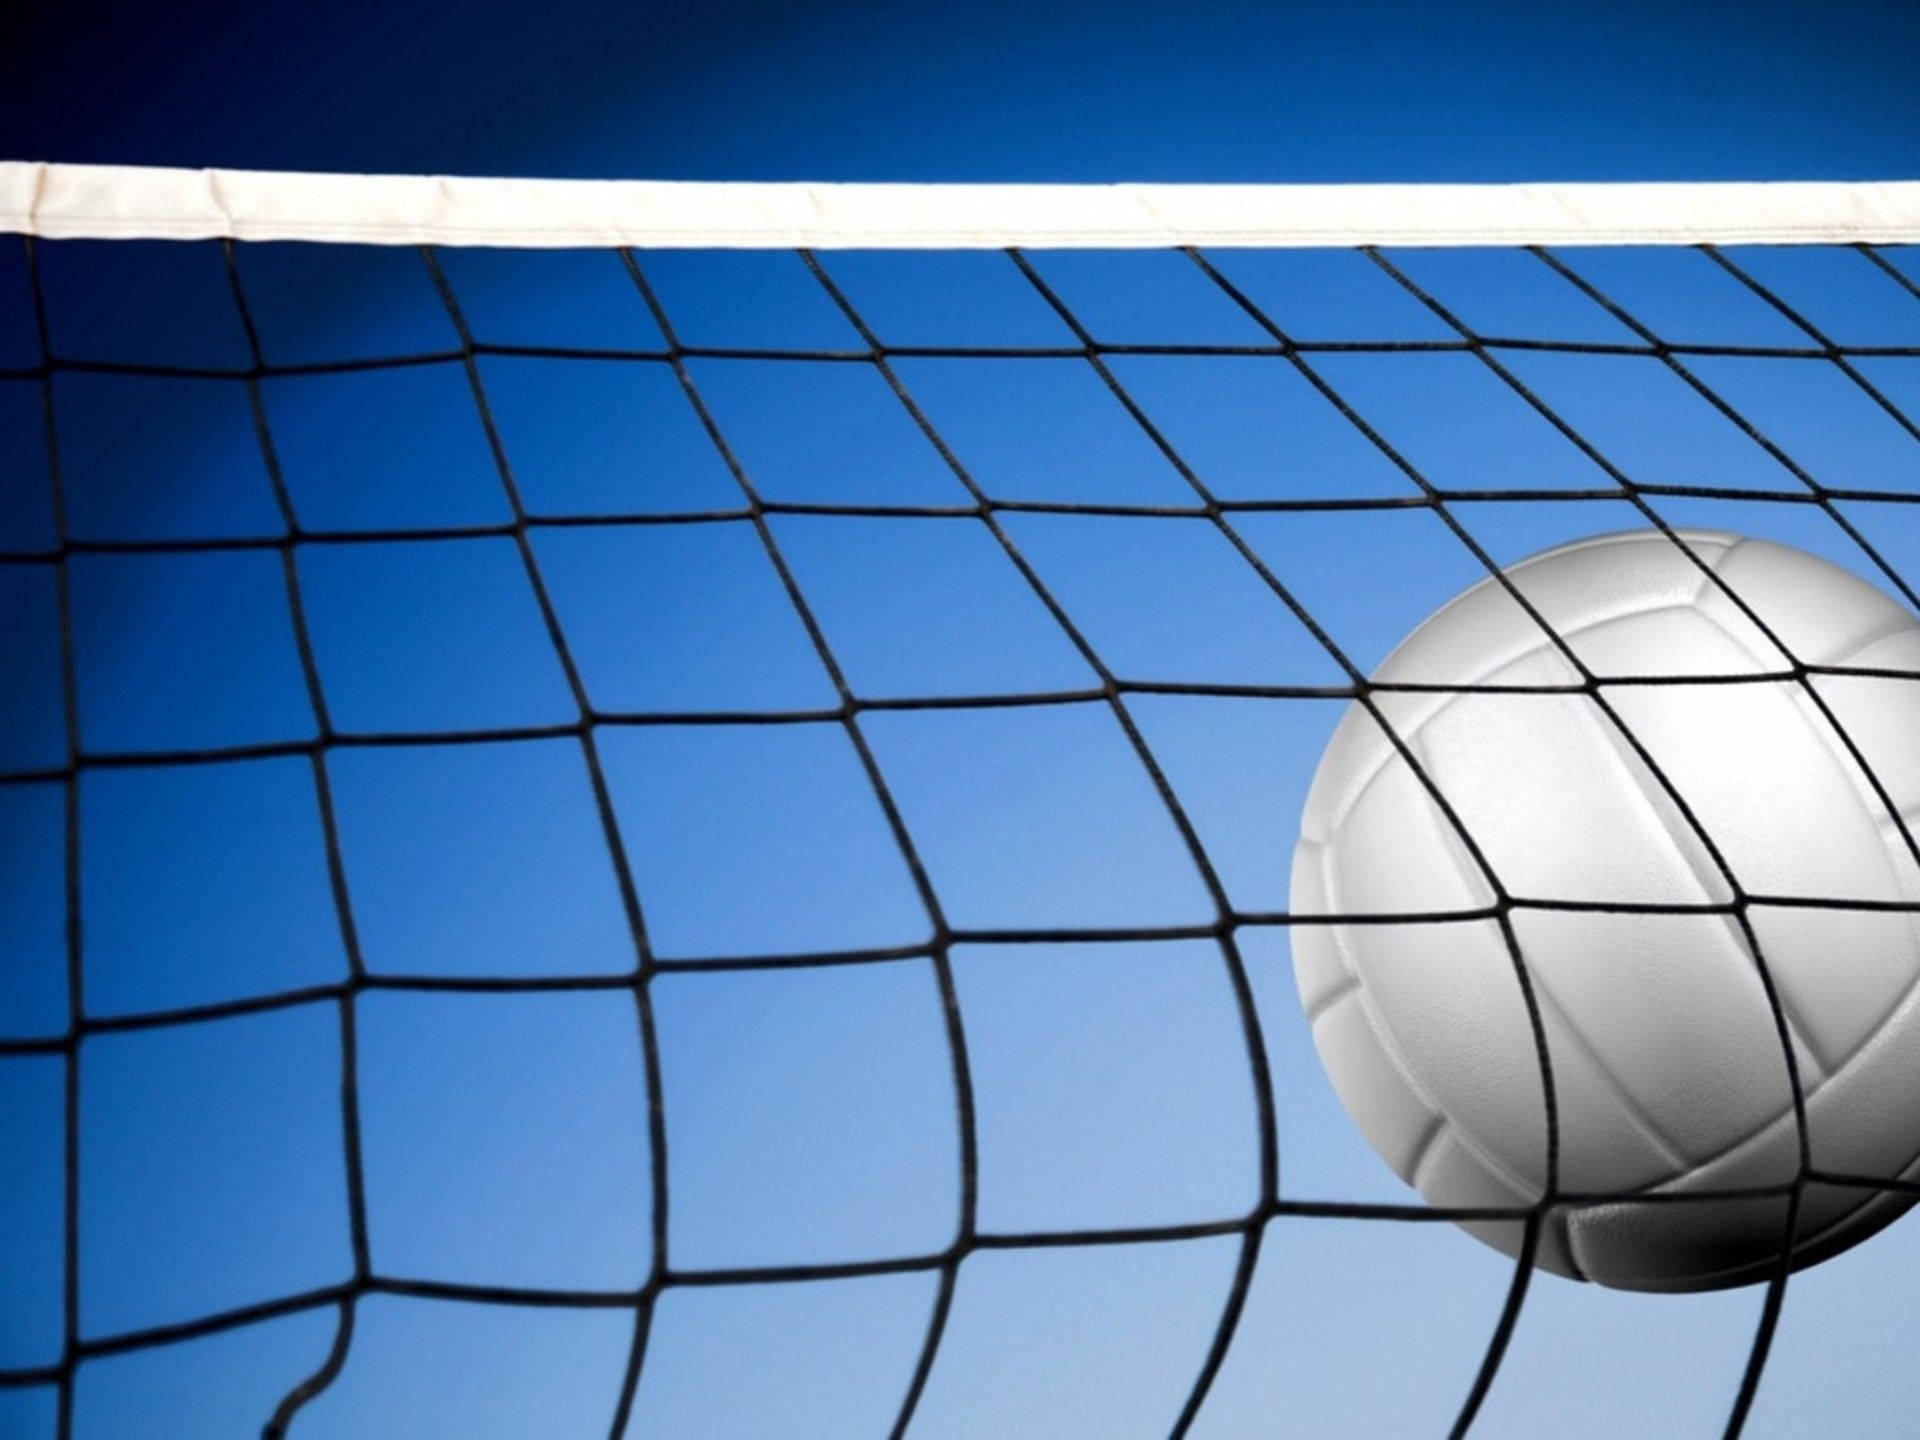 Volleyball Spiked Ball On Net